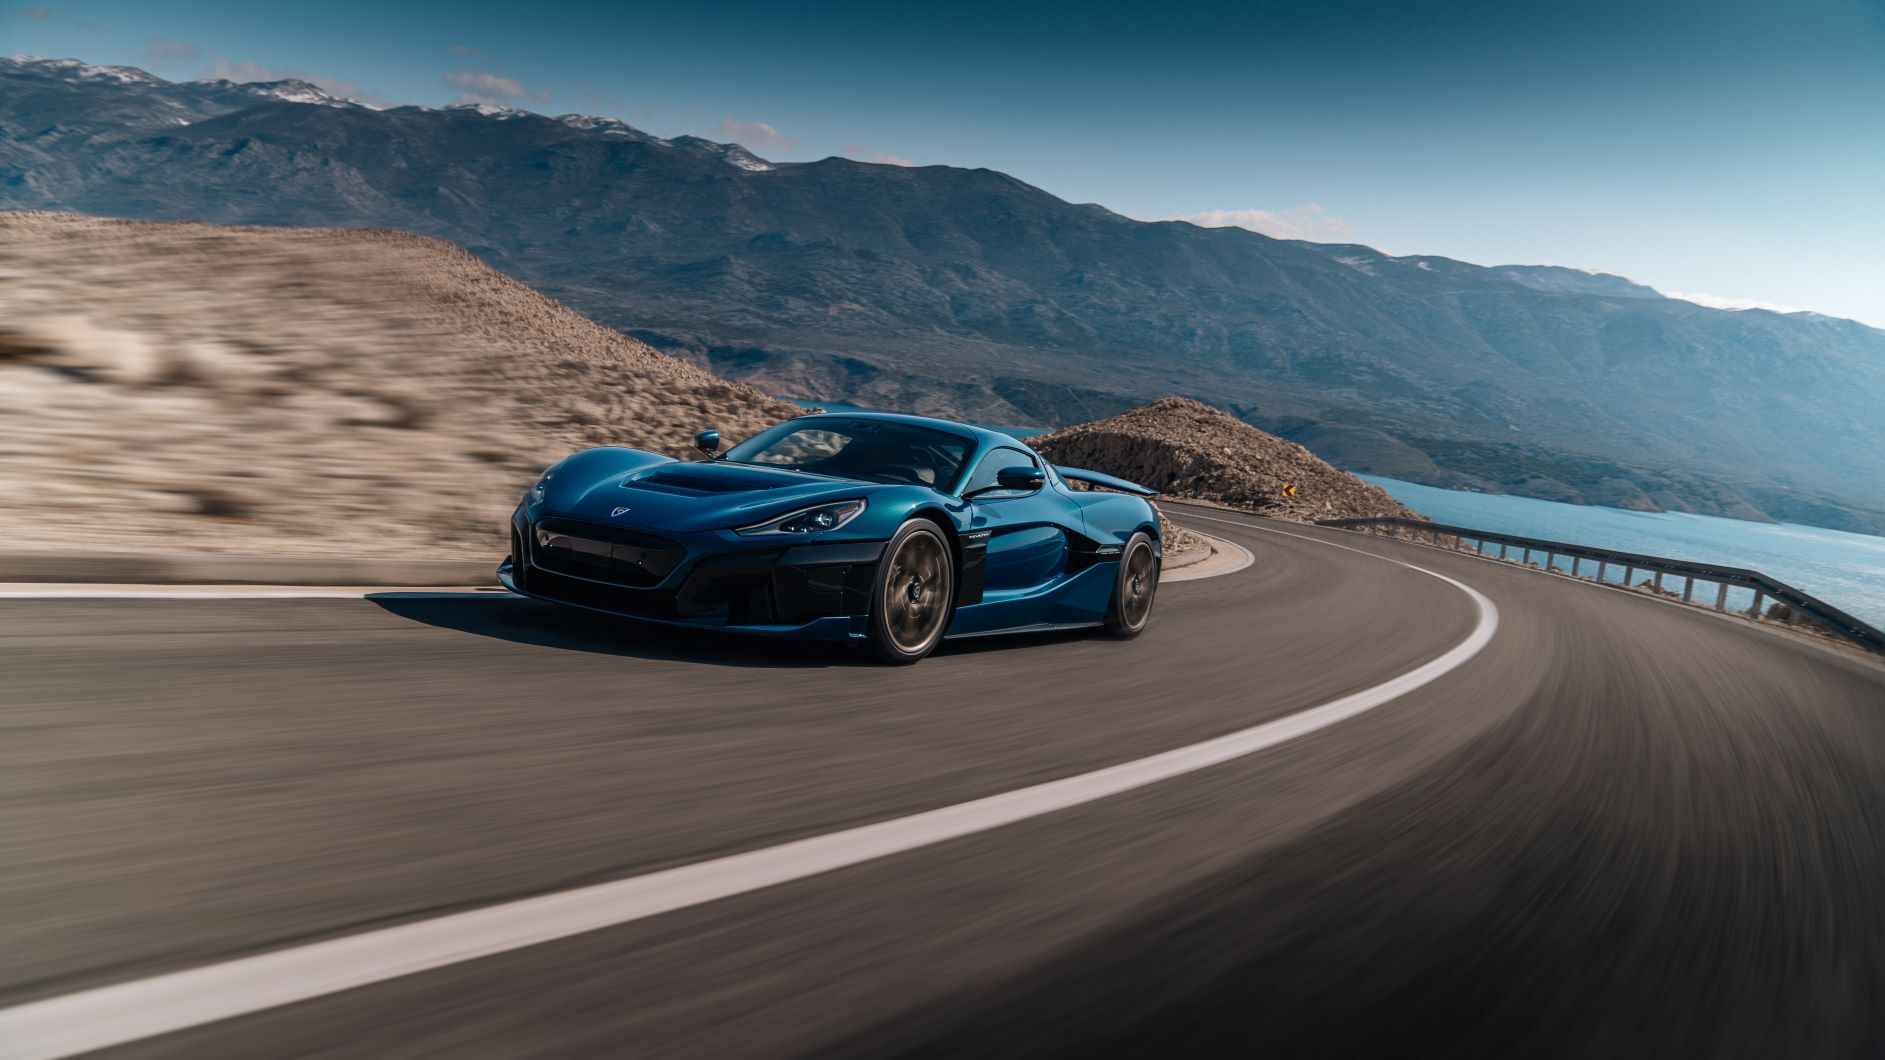 Rimac Nevera first drive: An entirely new level of hypercar performance